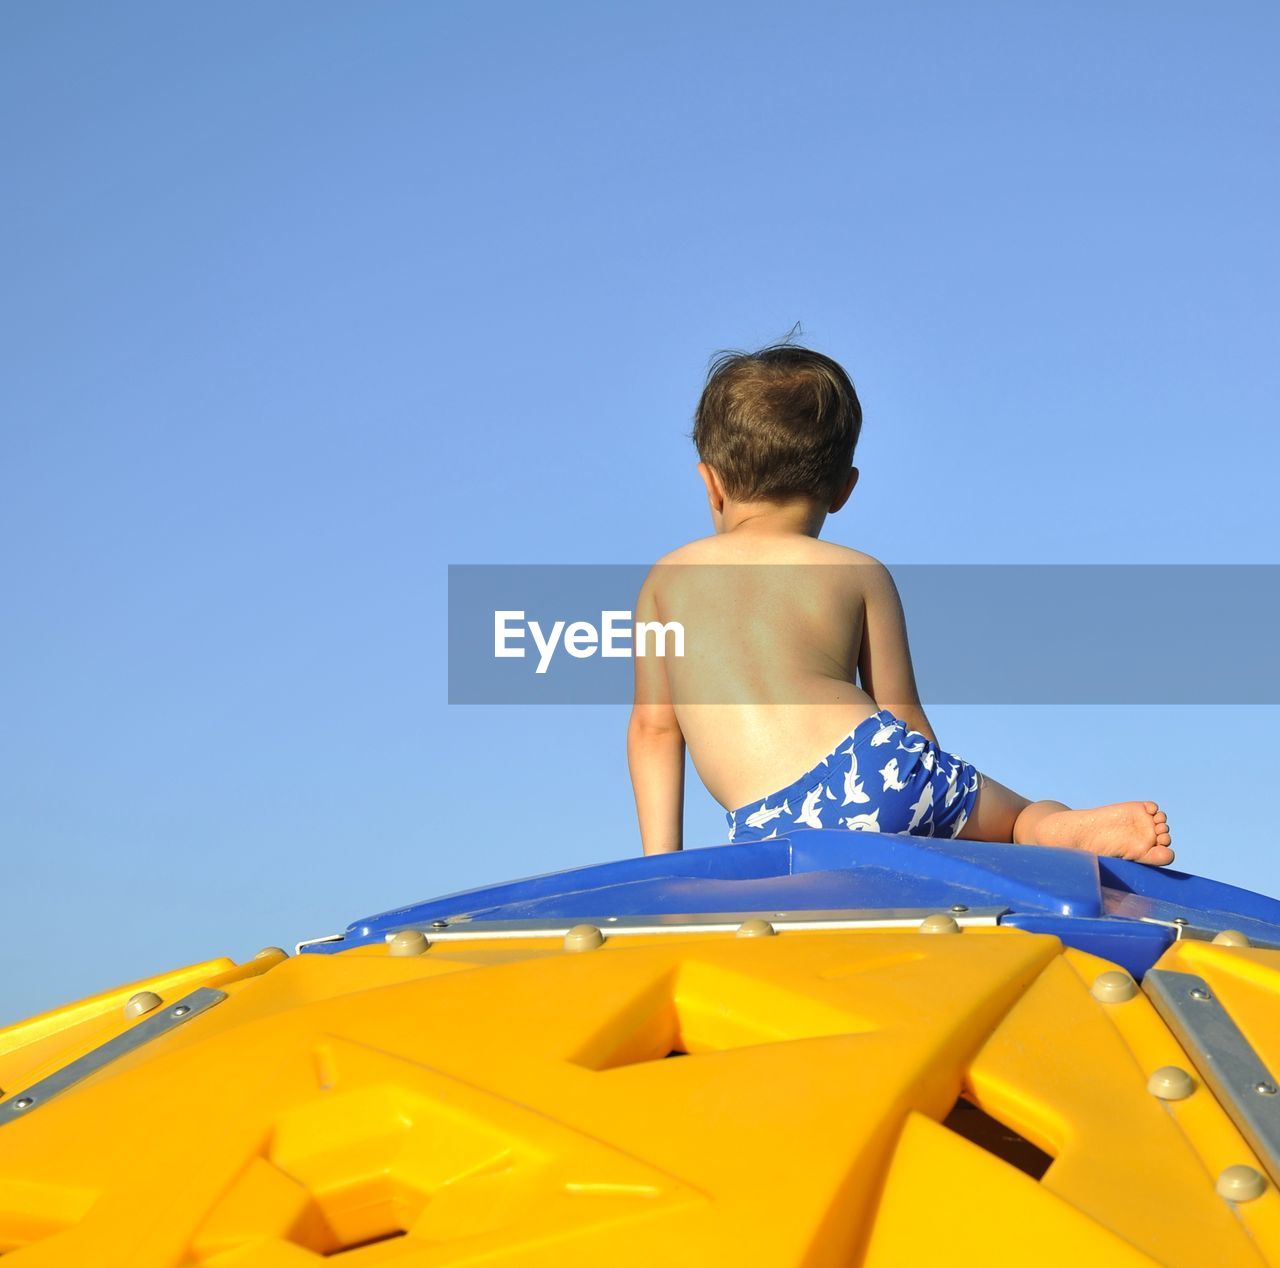 Rear view of shirtless boy sitting on play equipment against clear blue sky